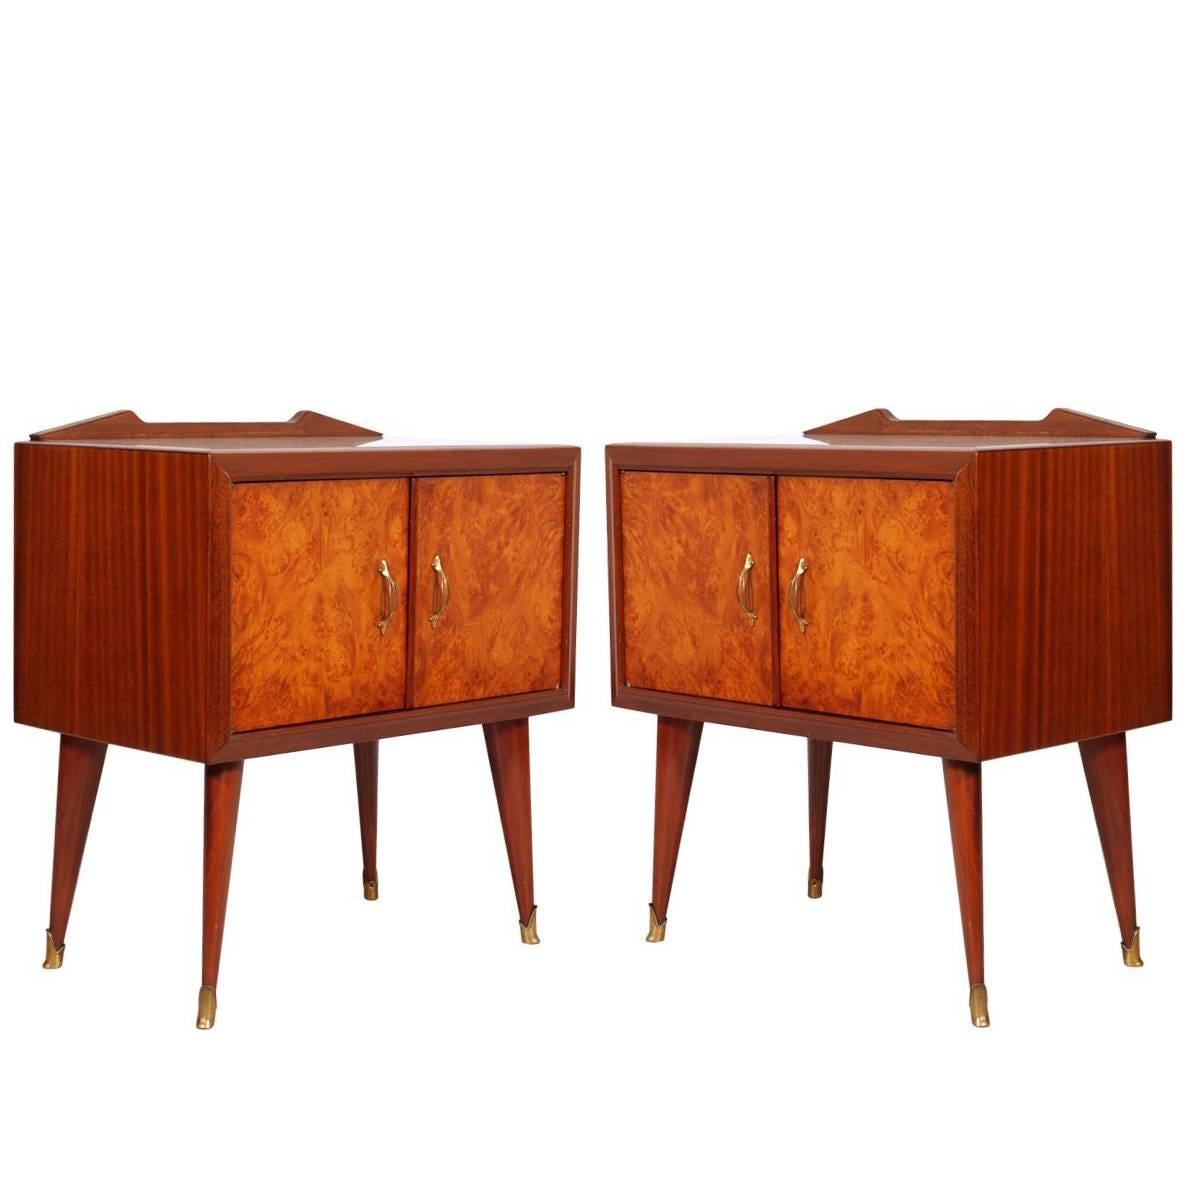 1940s Pair of Nightstands Paolo Buffa Attributed, Mahogany and Elm Burl Veneered For Sale